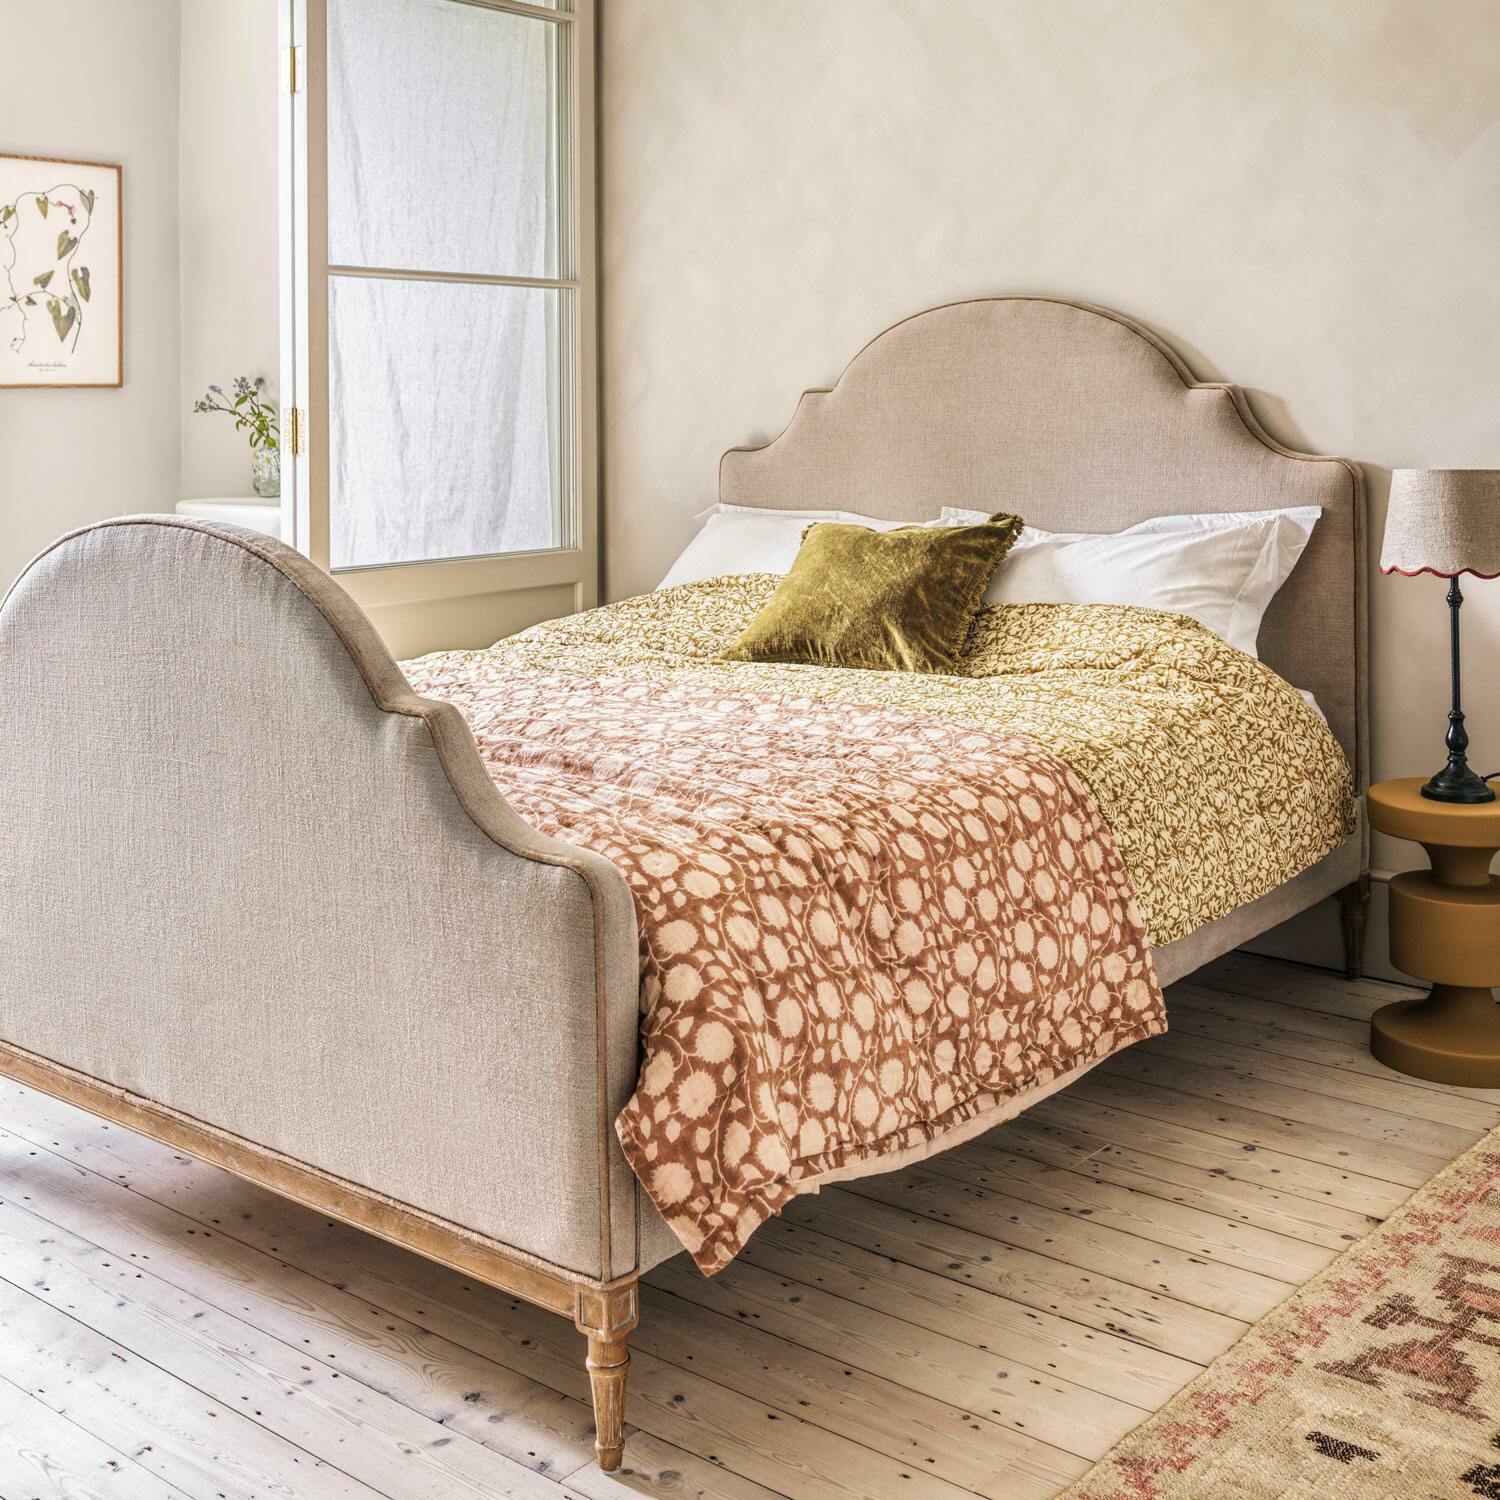 Read more about Graham and green adelaide natural linen king size bed